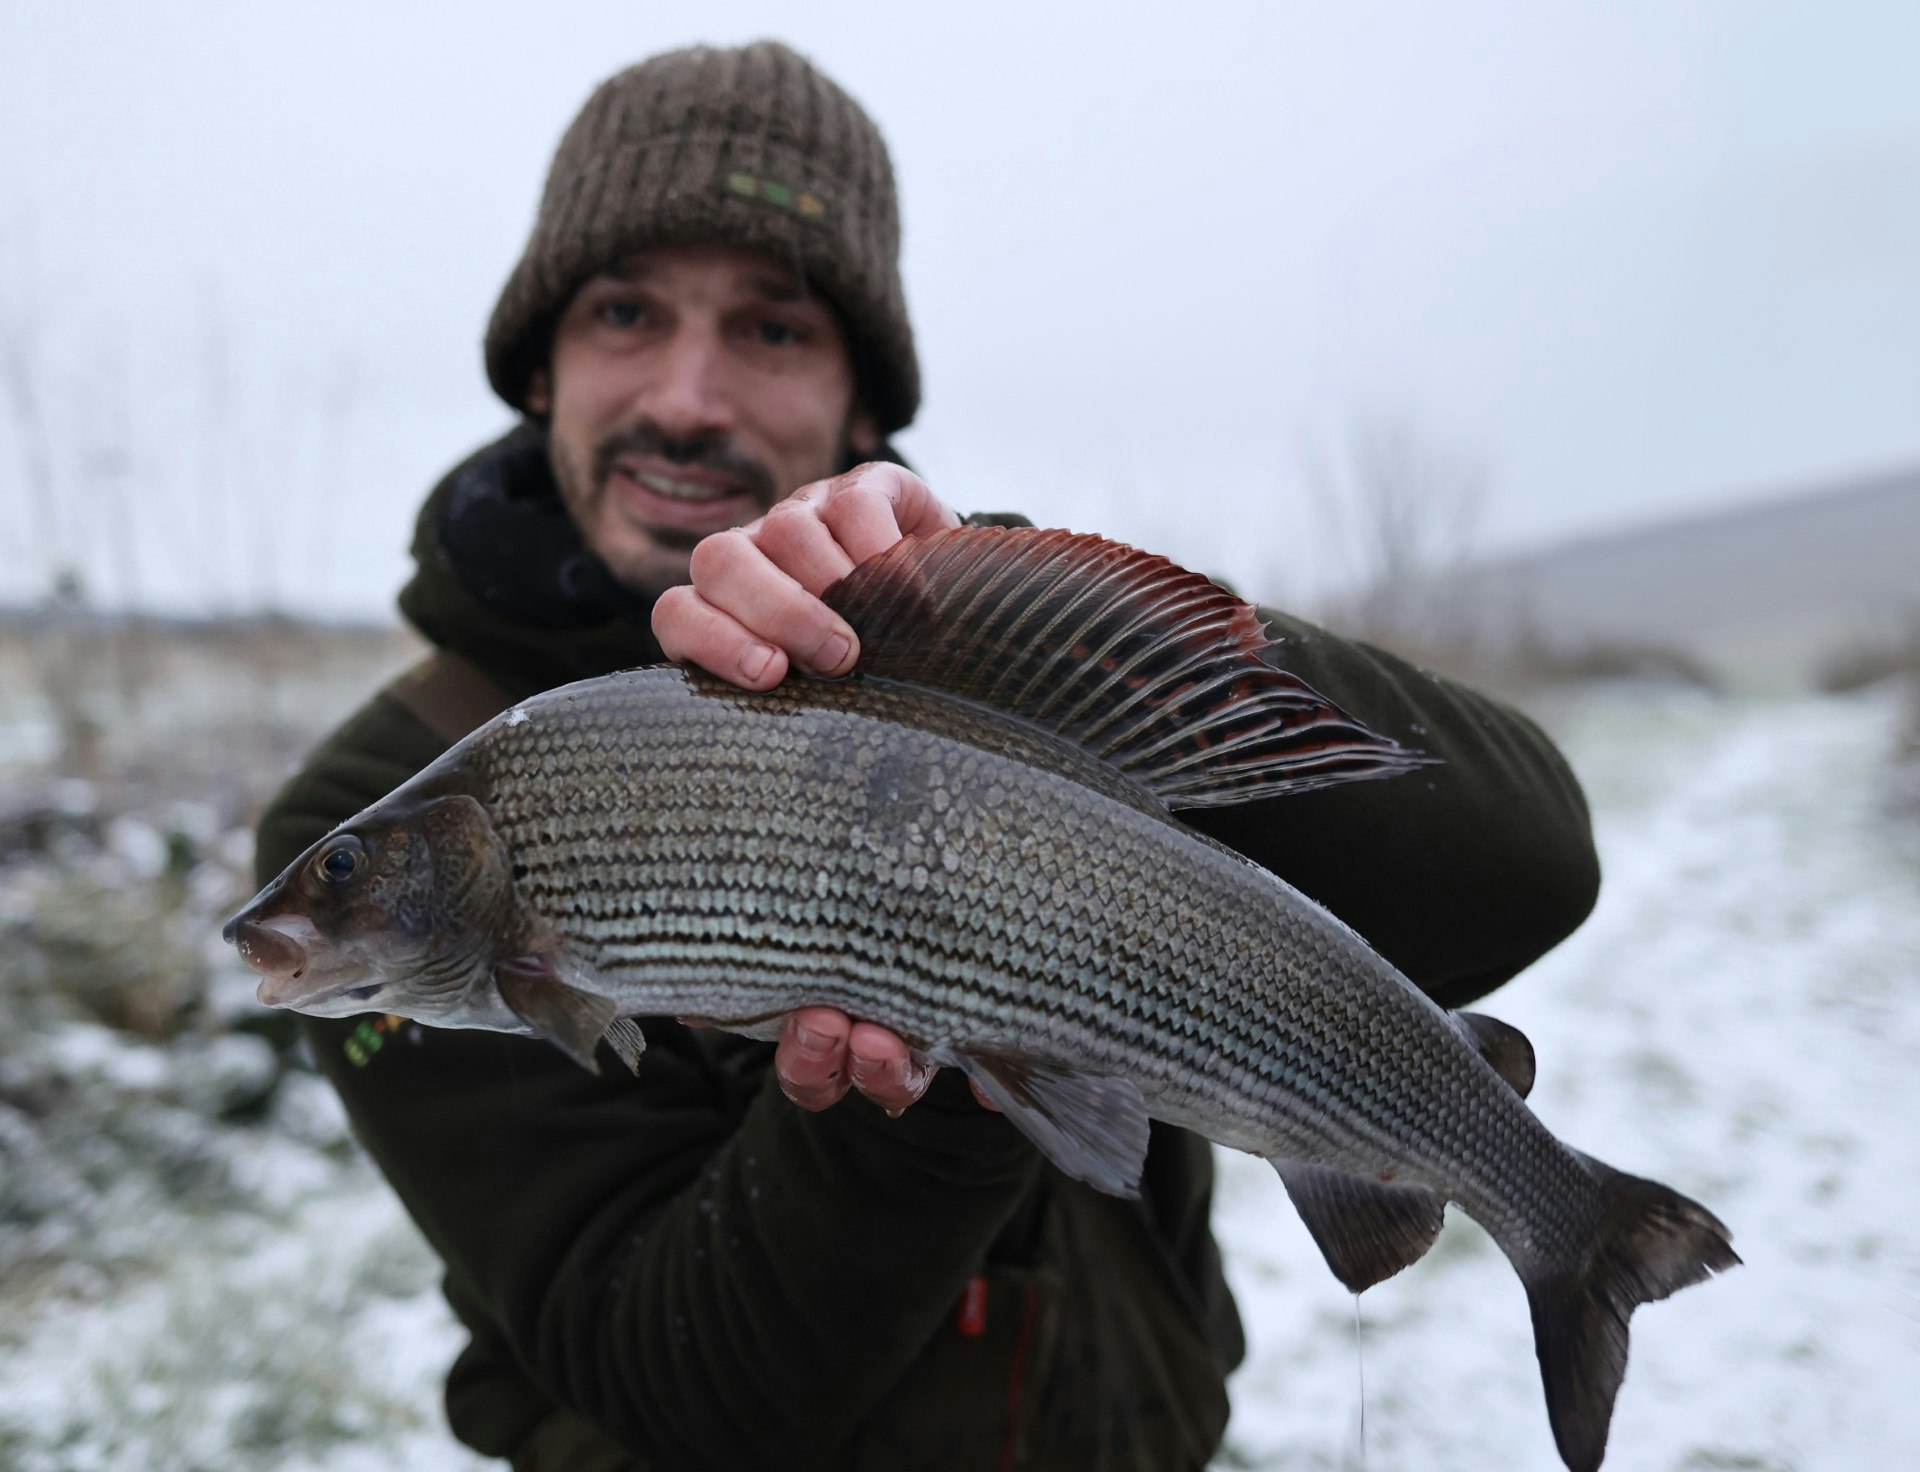 Daniel with his hard-earned grayling, what a magnificent fish it is too!